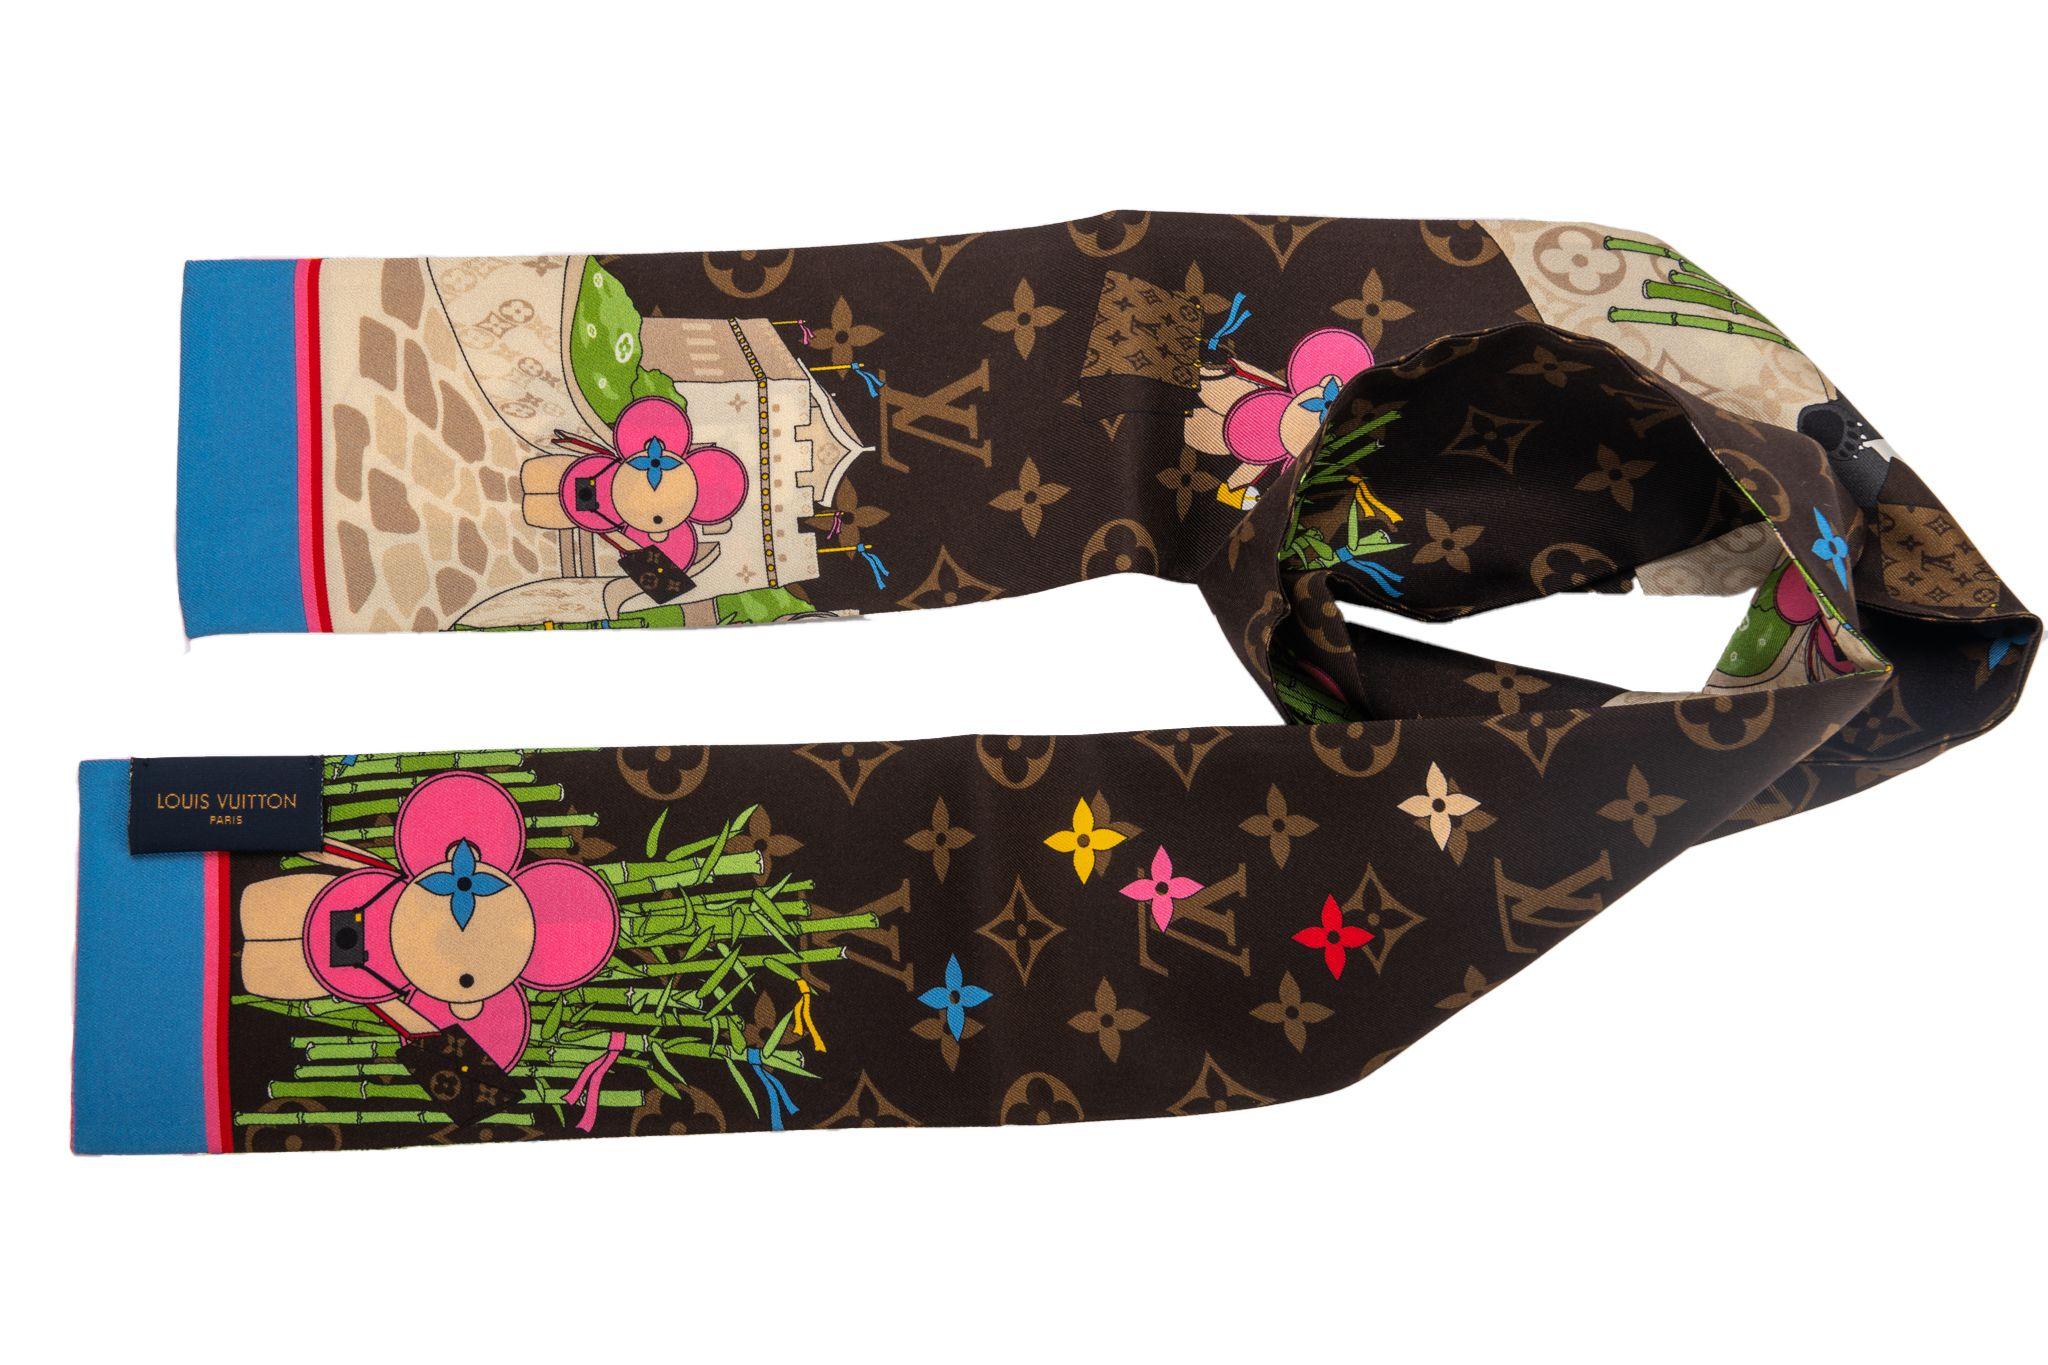 Louis Vuitton Christmas 2021silk bandeau with Vivienne and Panda design. Brand new in original box .